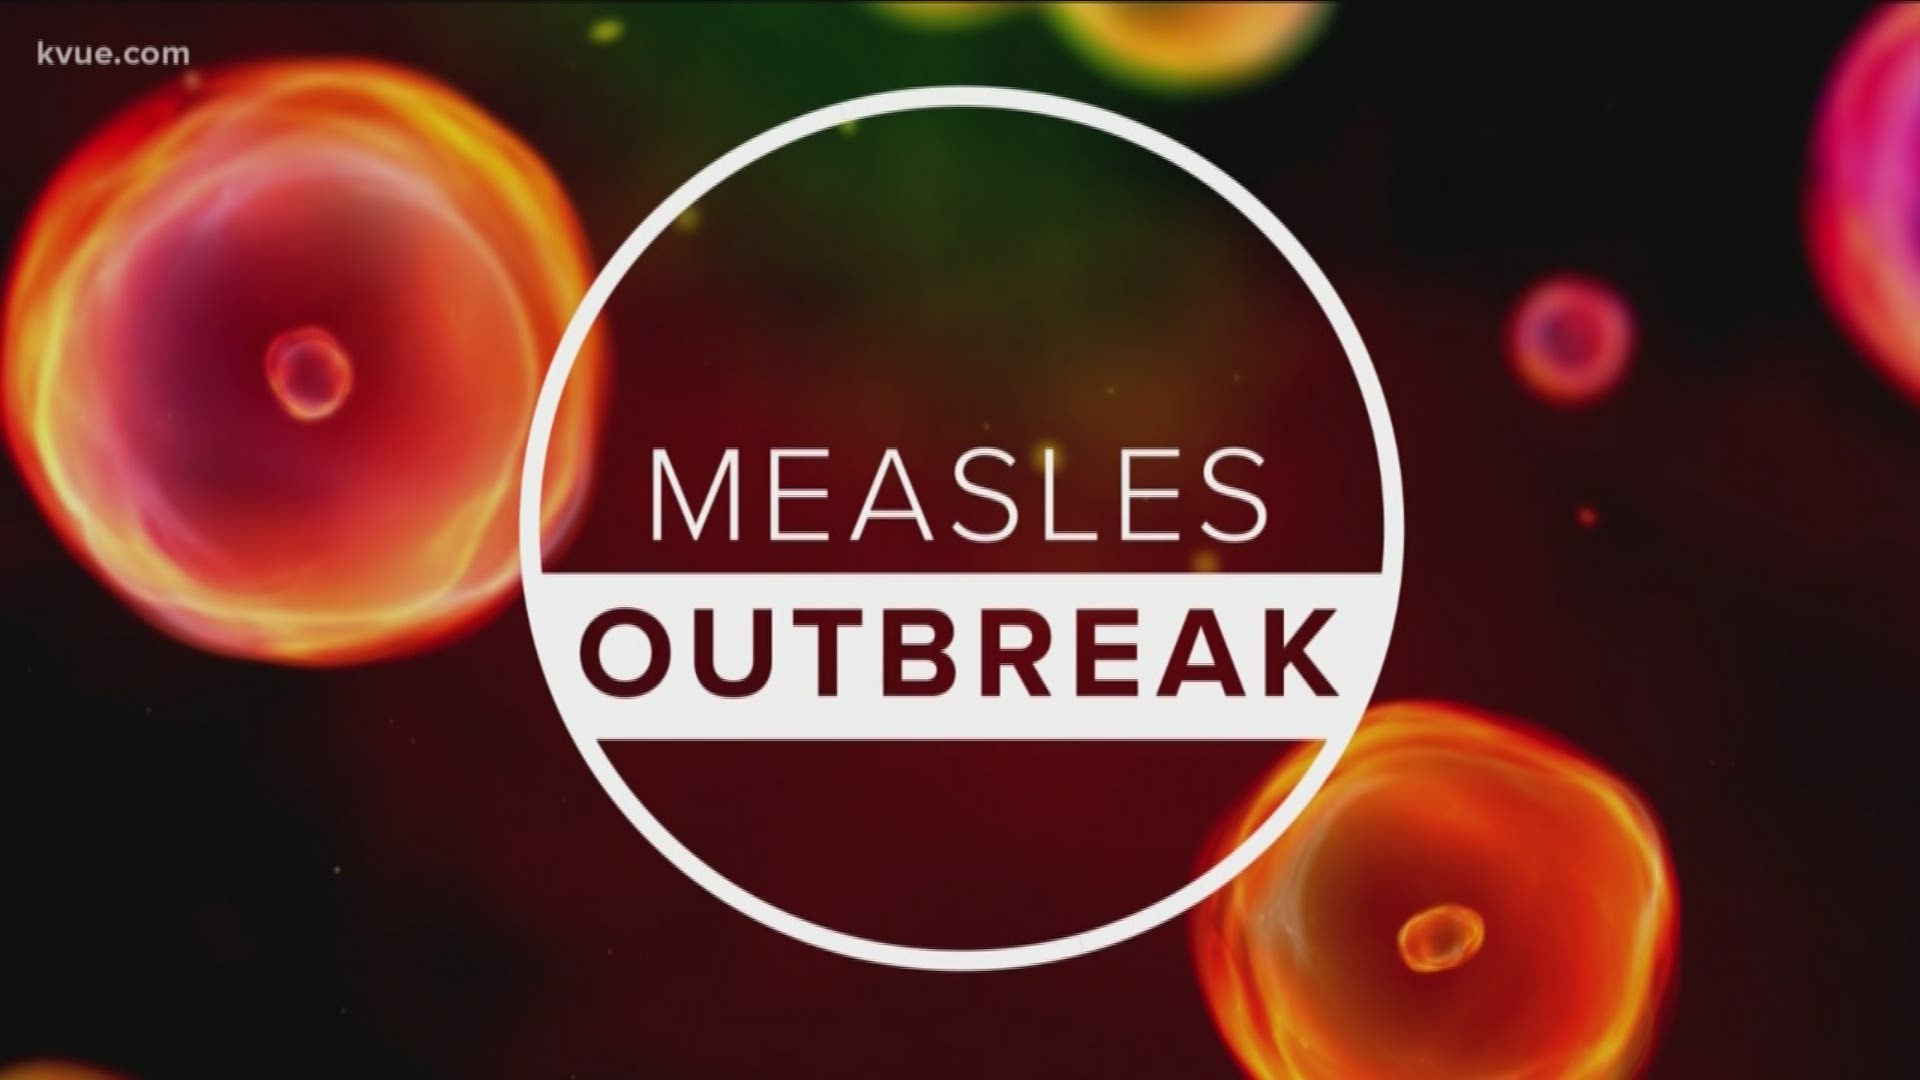 Health officials said there haven't been any new measles cases since the first last month.